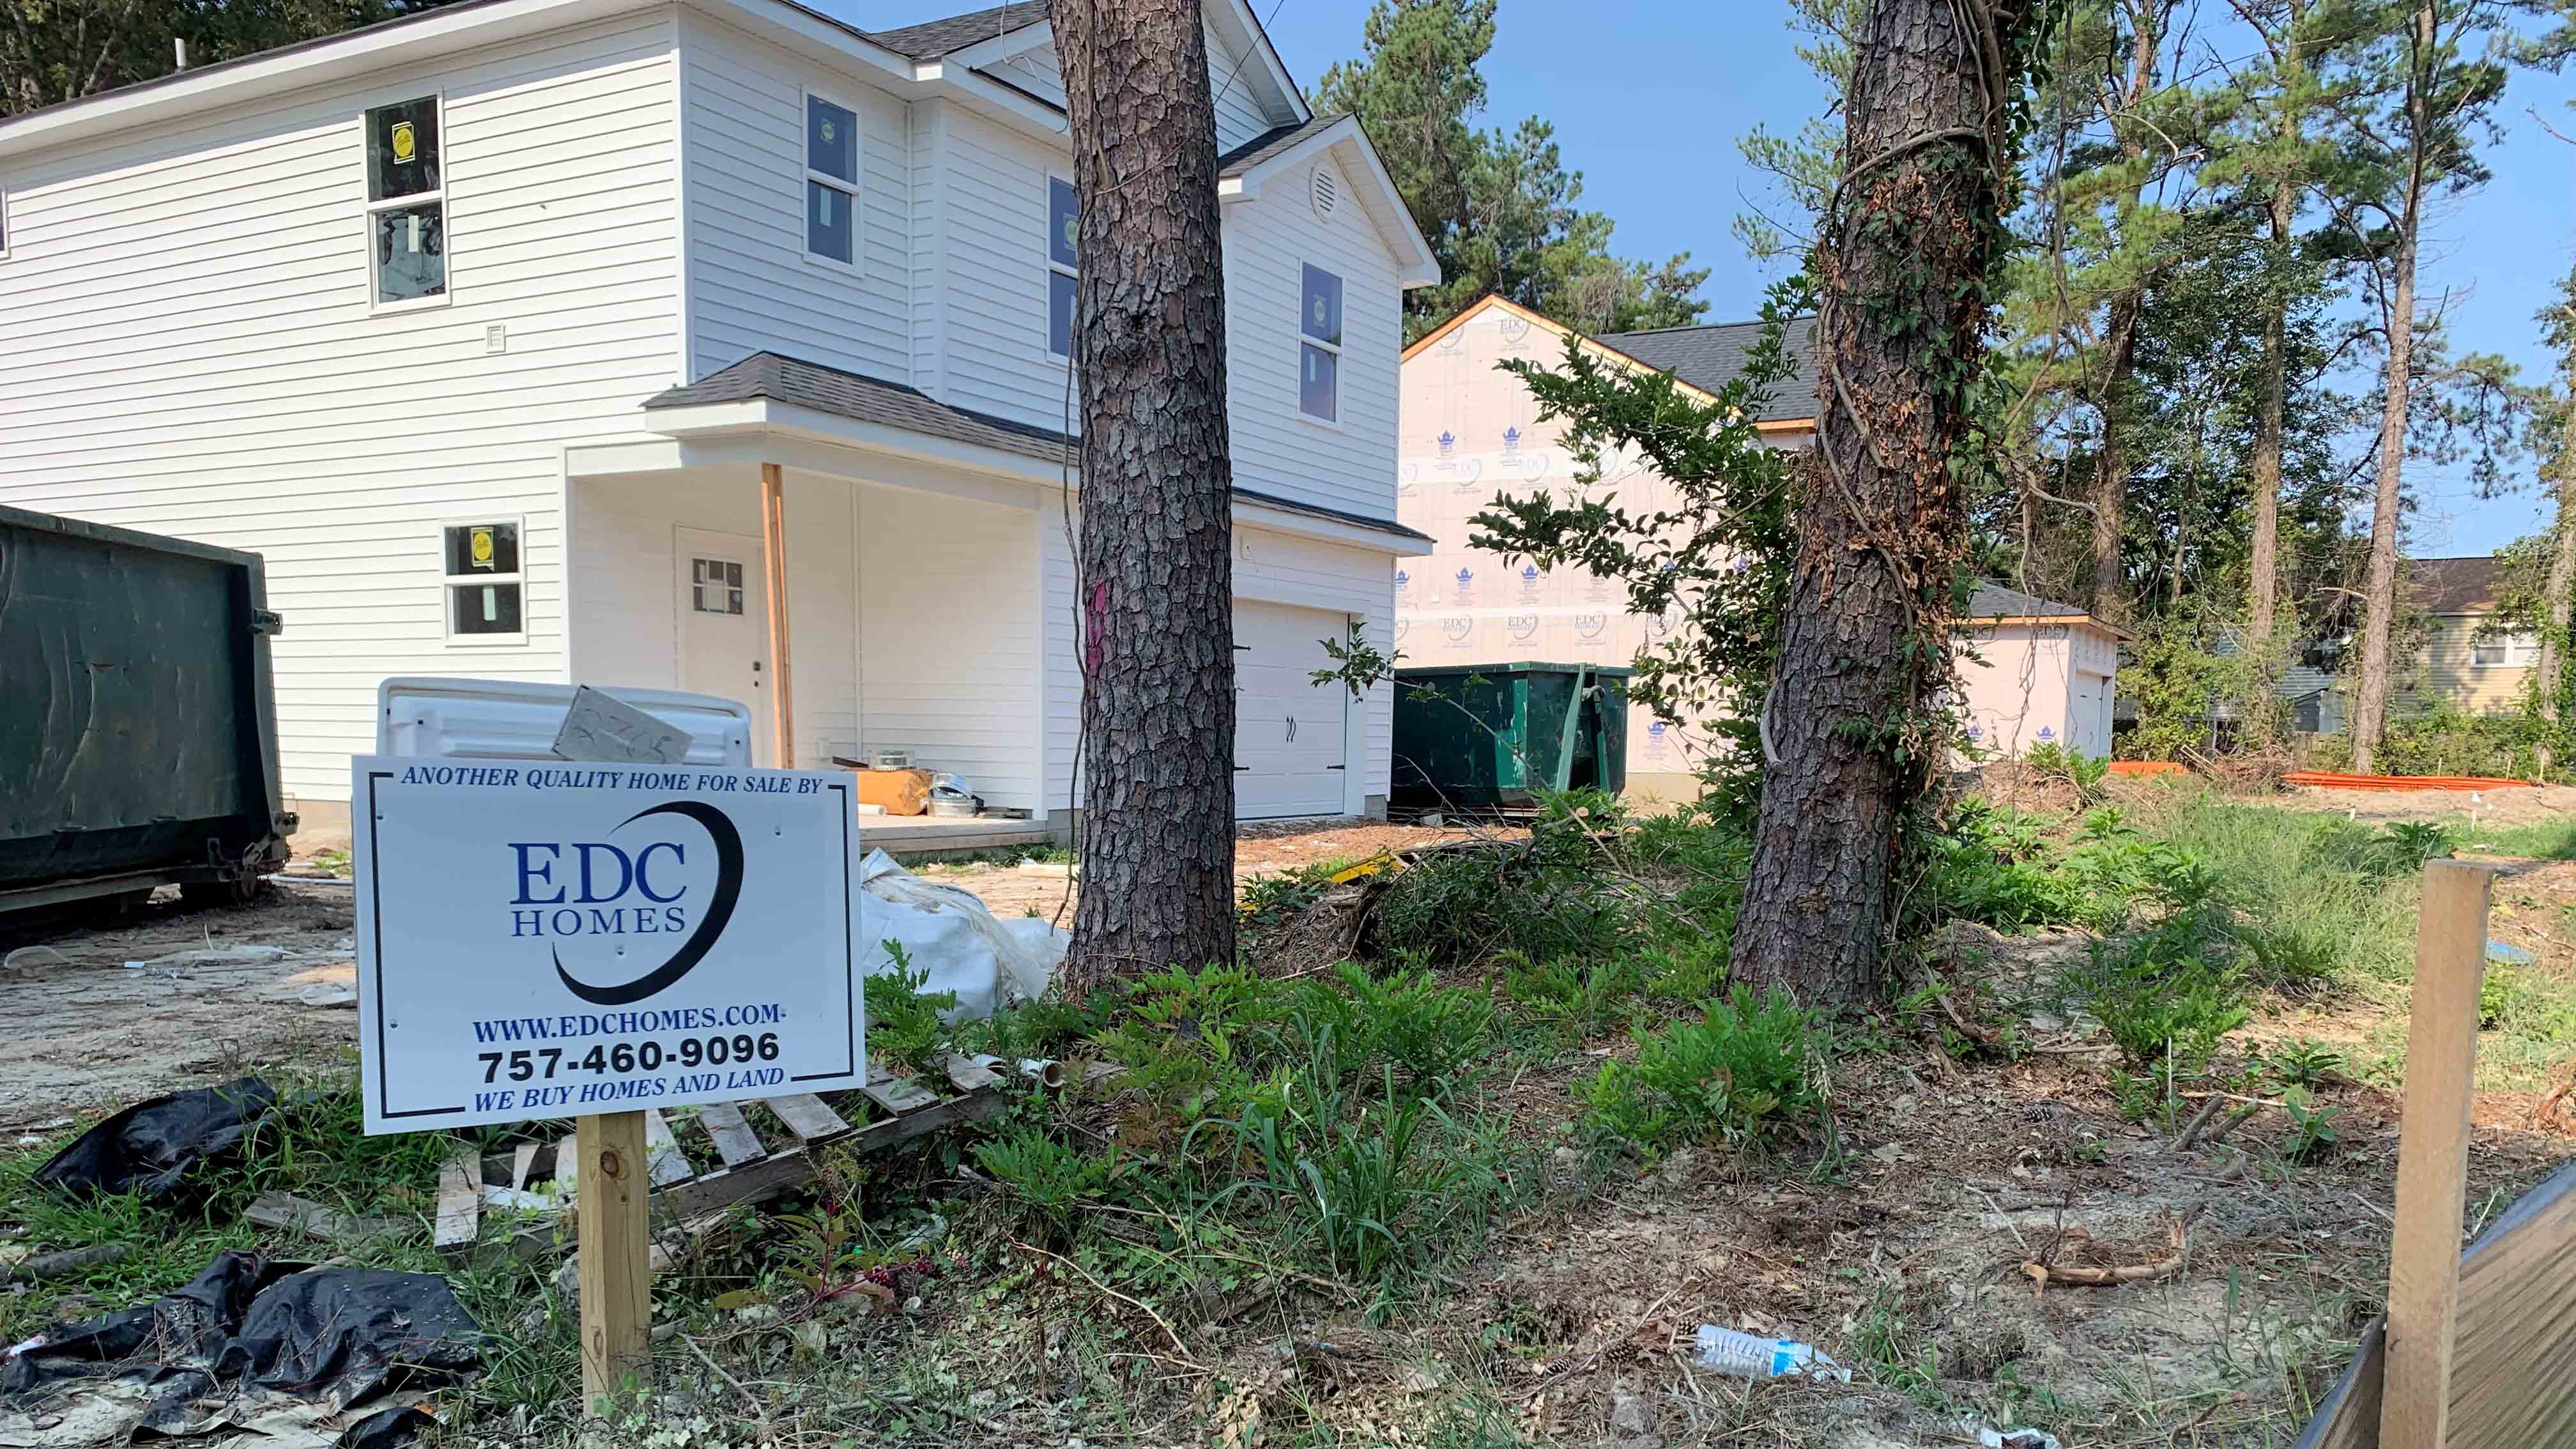 Photo by Mechelle Hankerson. In 2016, researchers found Virginia Beach could begin addressing rising housing costs is to incentivize more dense development, like this lot in the northeastern part of the city that went from one home to several.